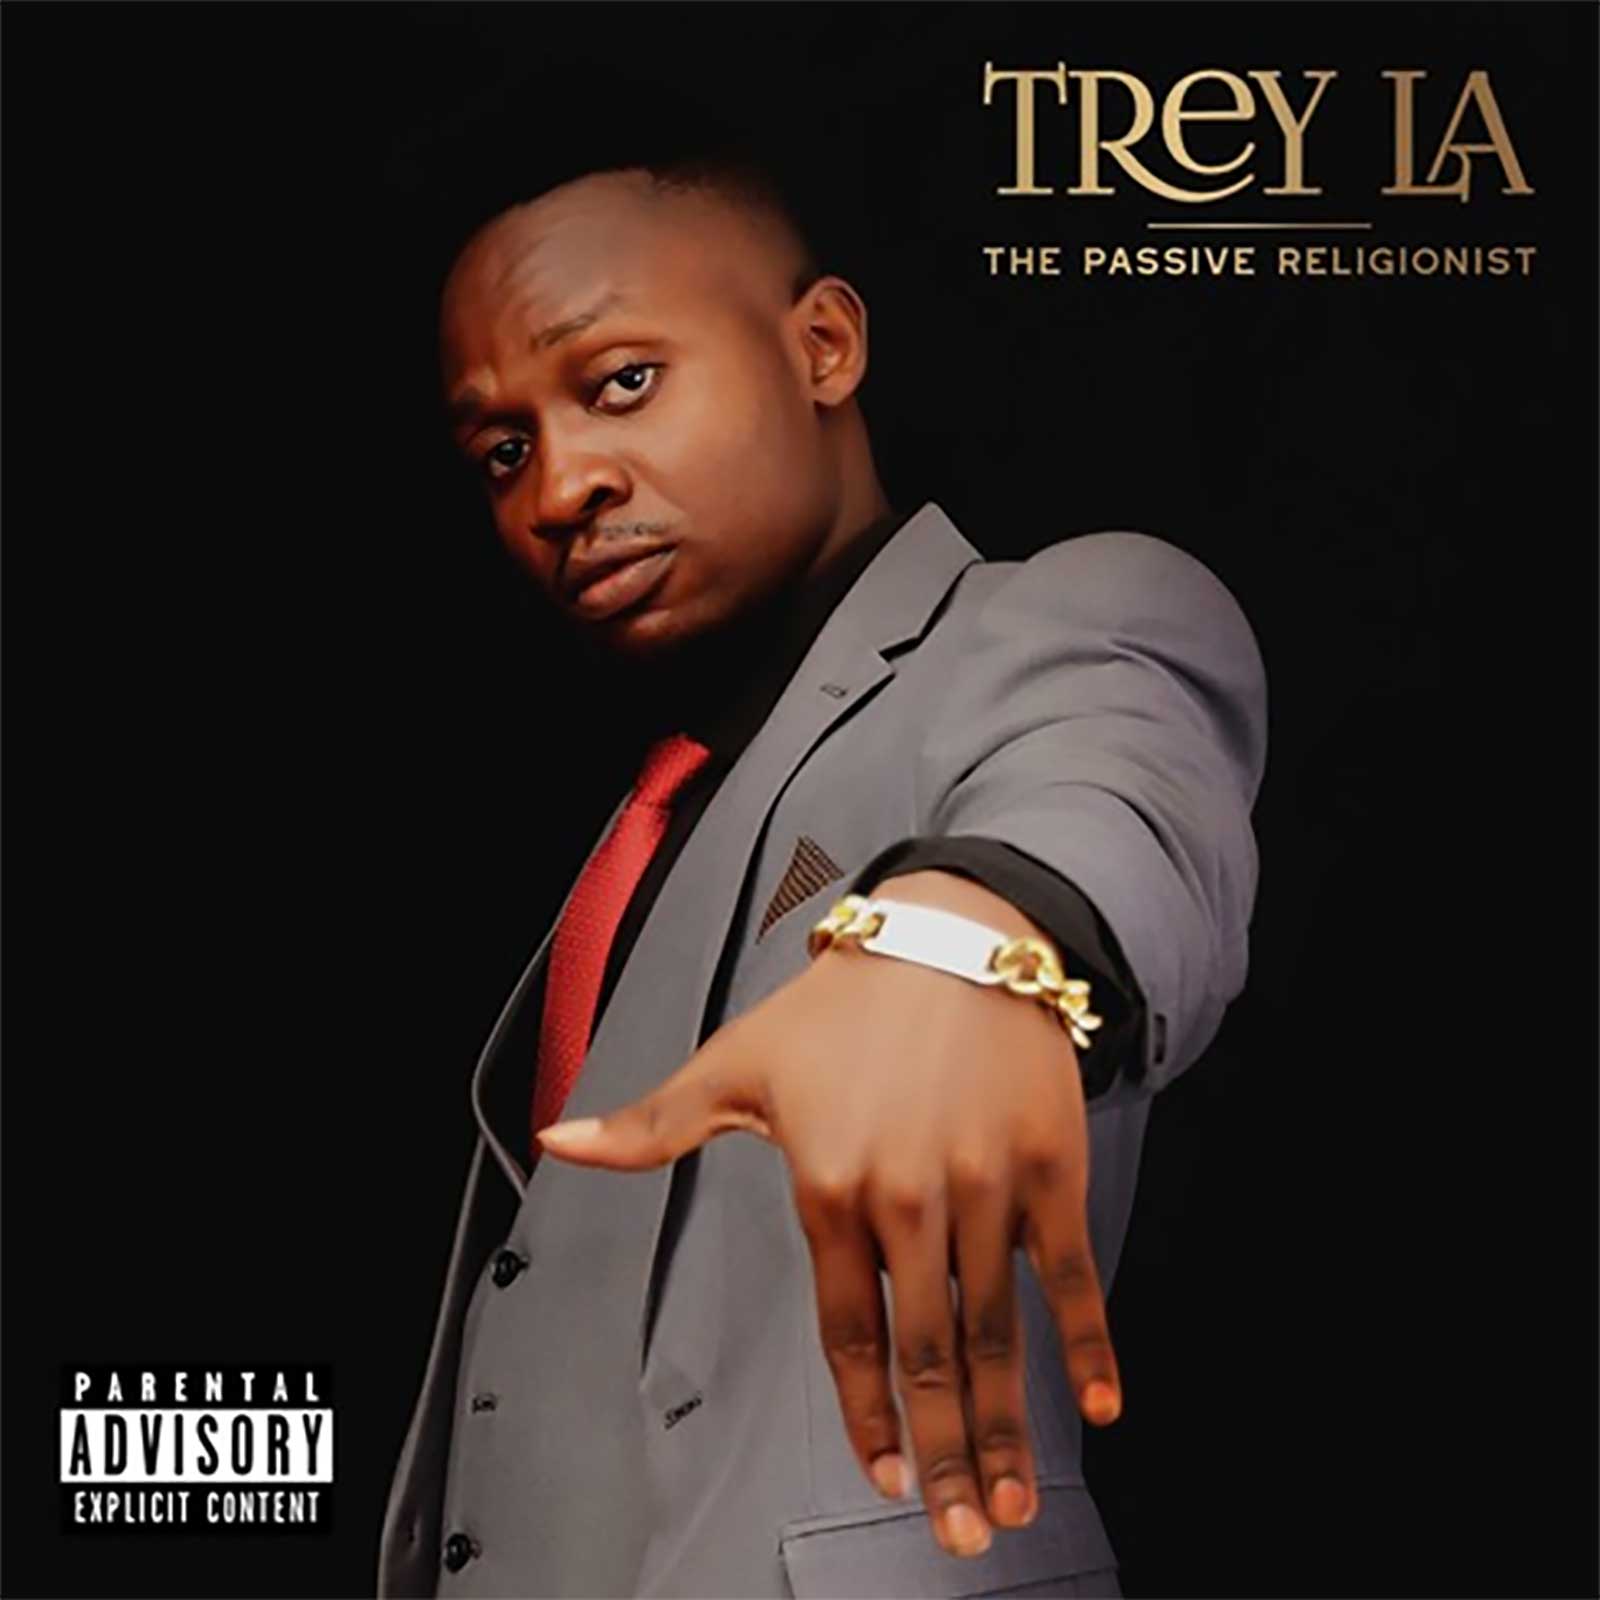 The Gynaecologist by Trey LA